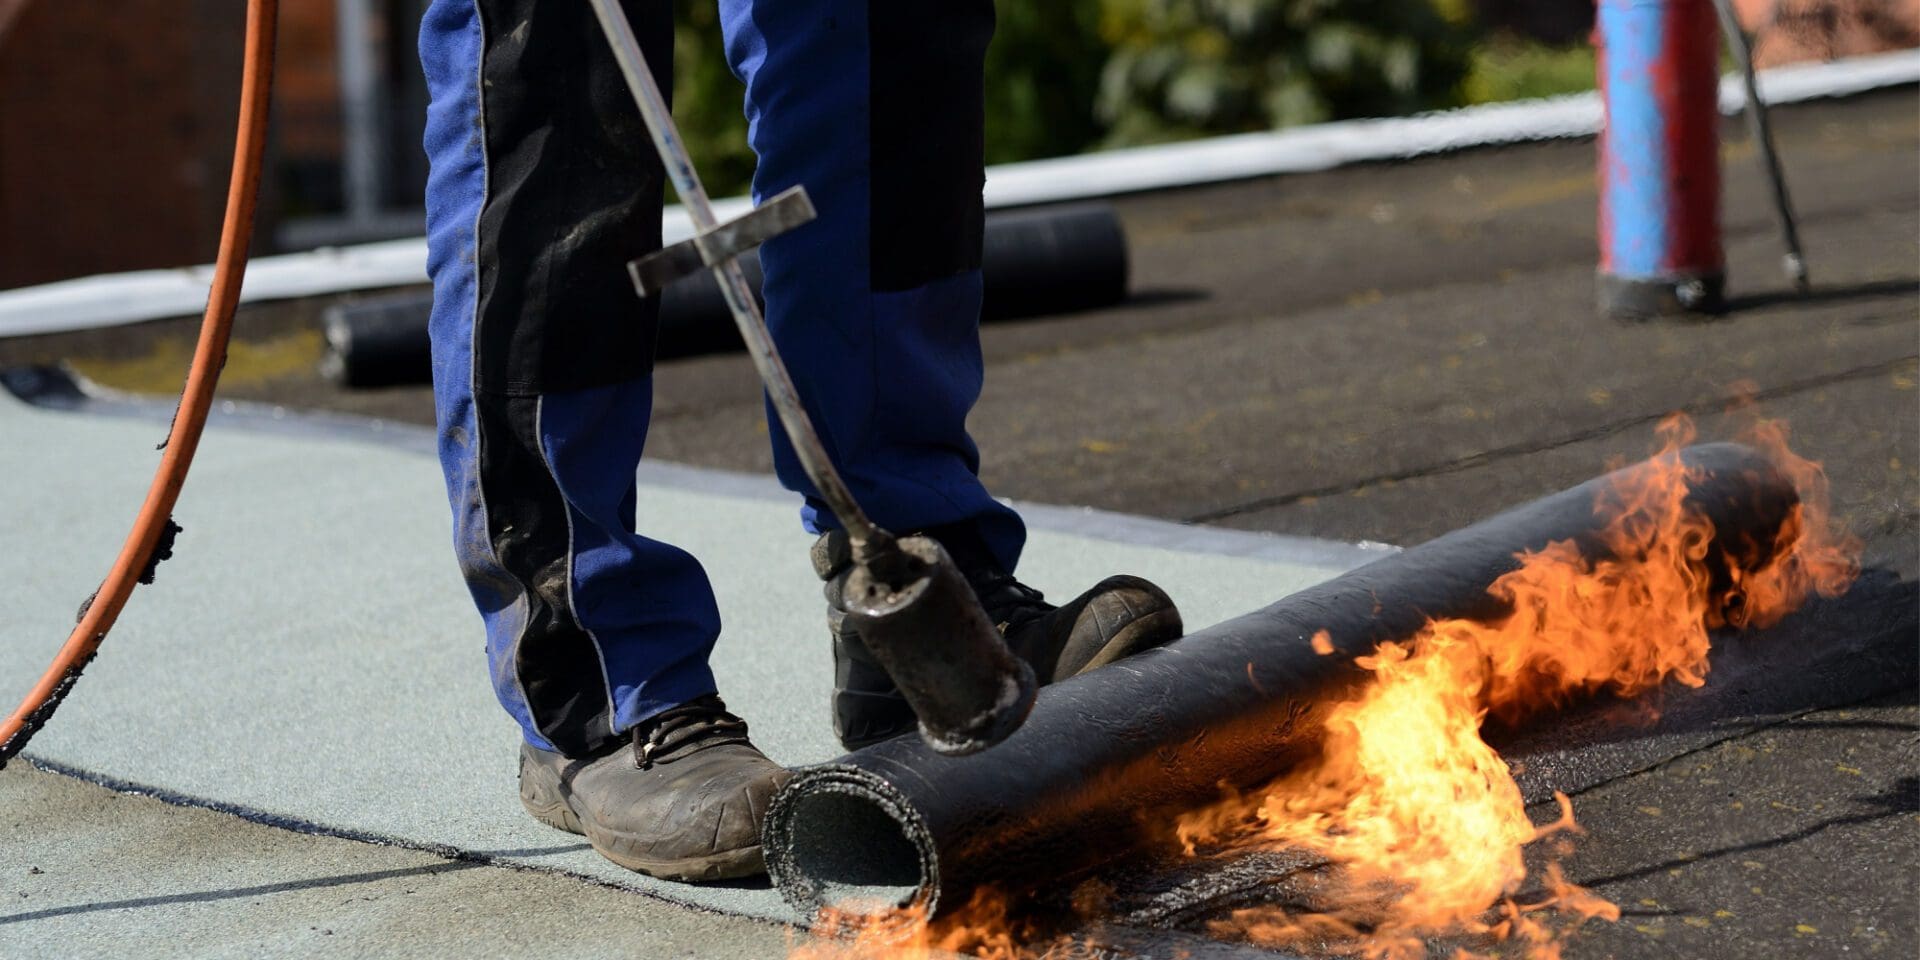 The Best Roofing Company for a Flat Roof Replacement